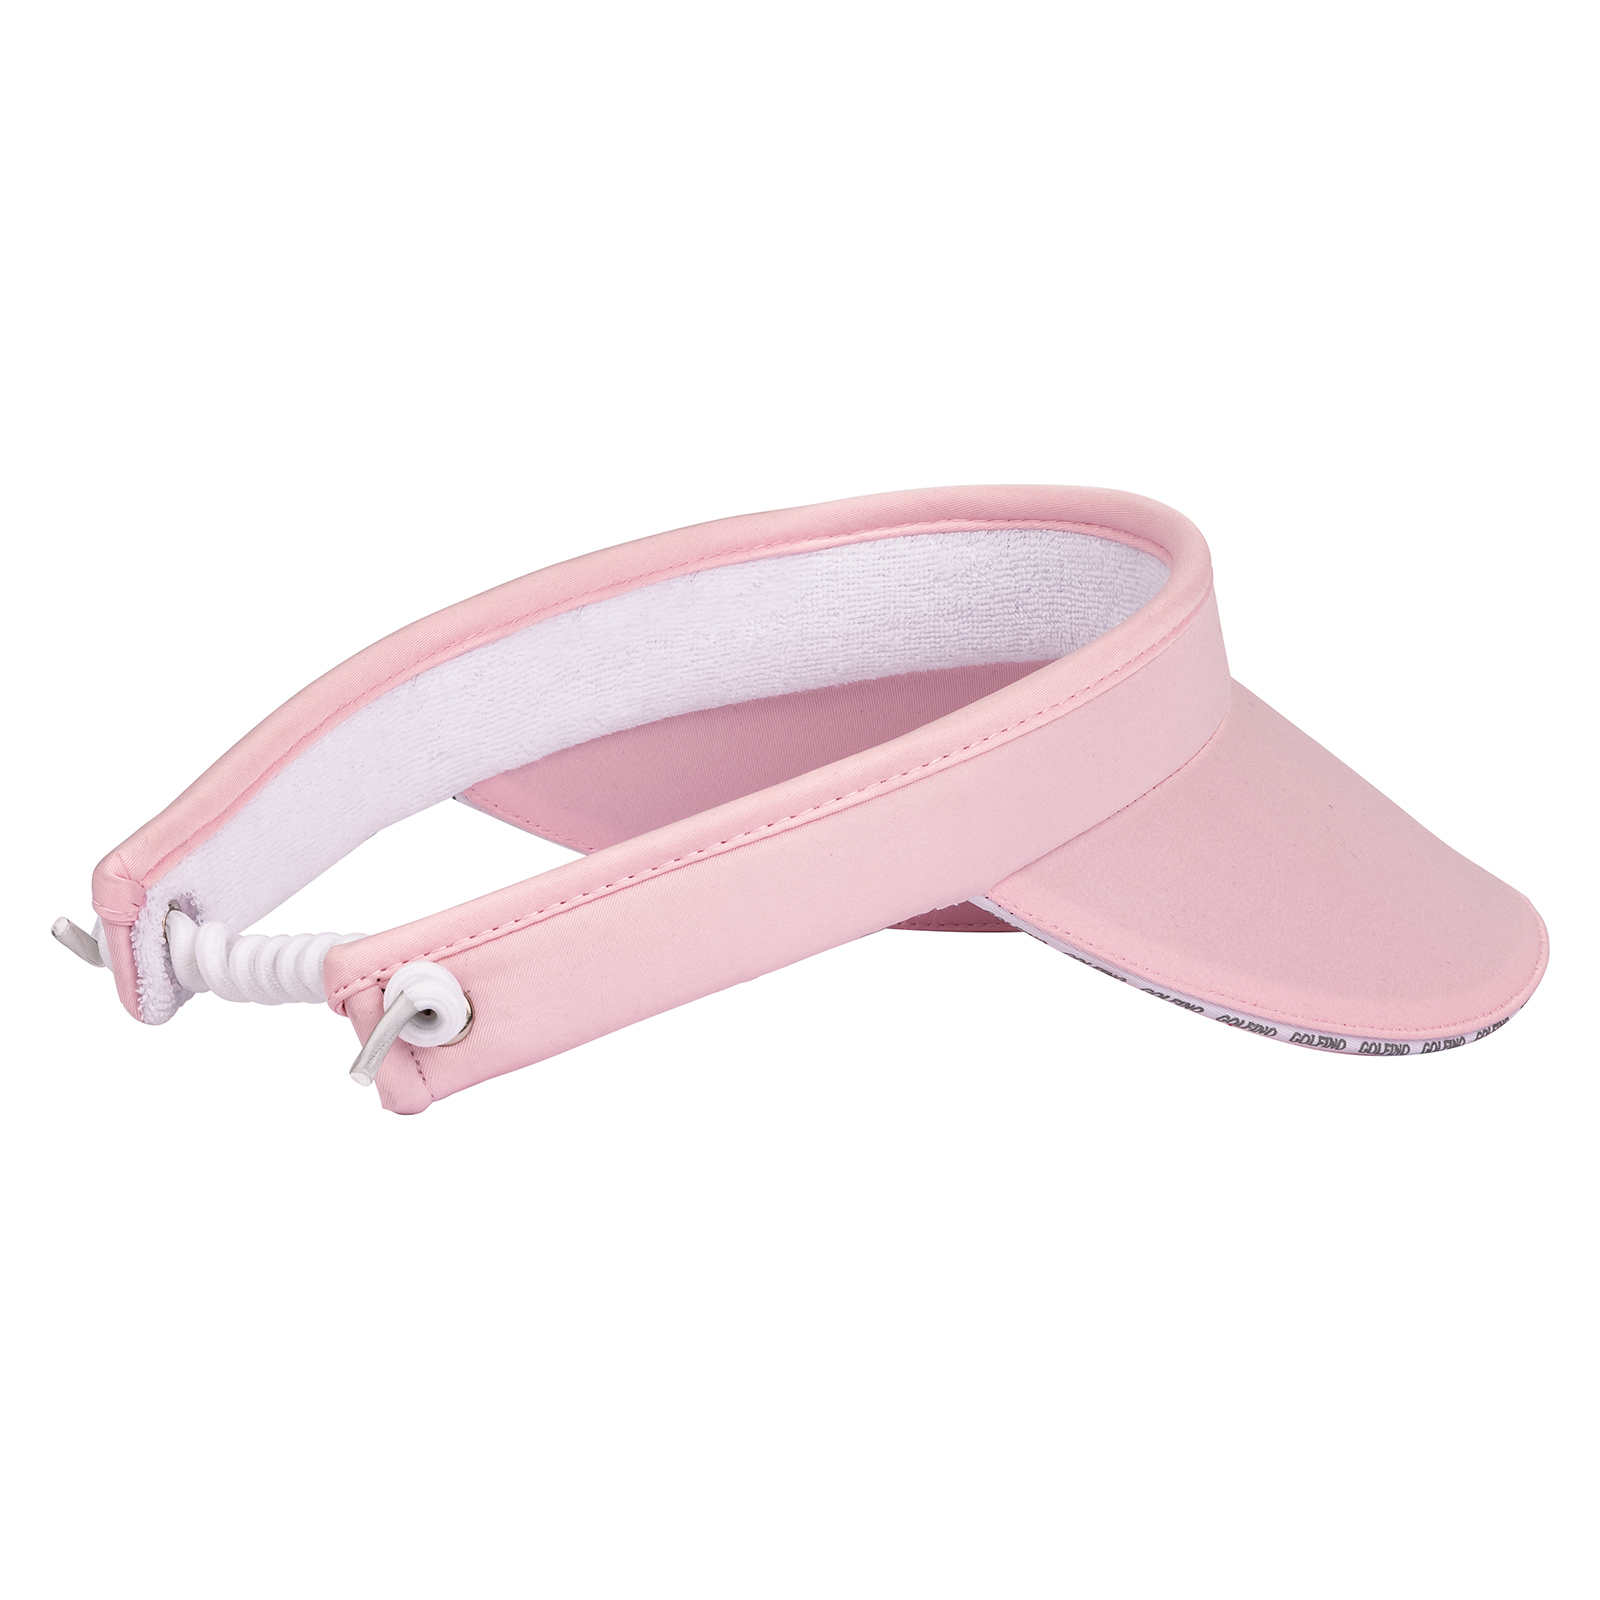 Ladies' golf visor with soft terry towelling sweatband